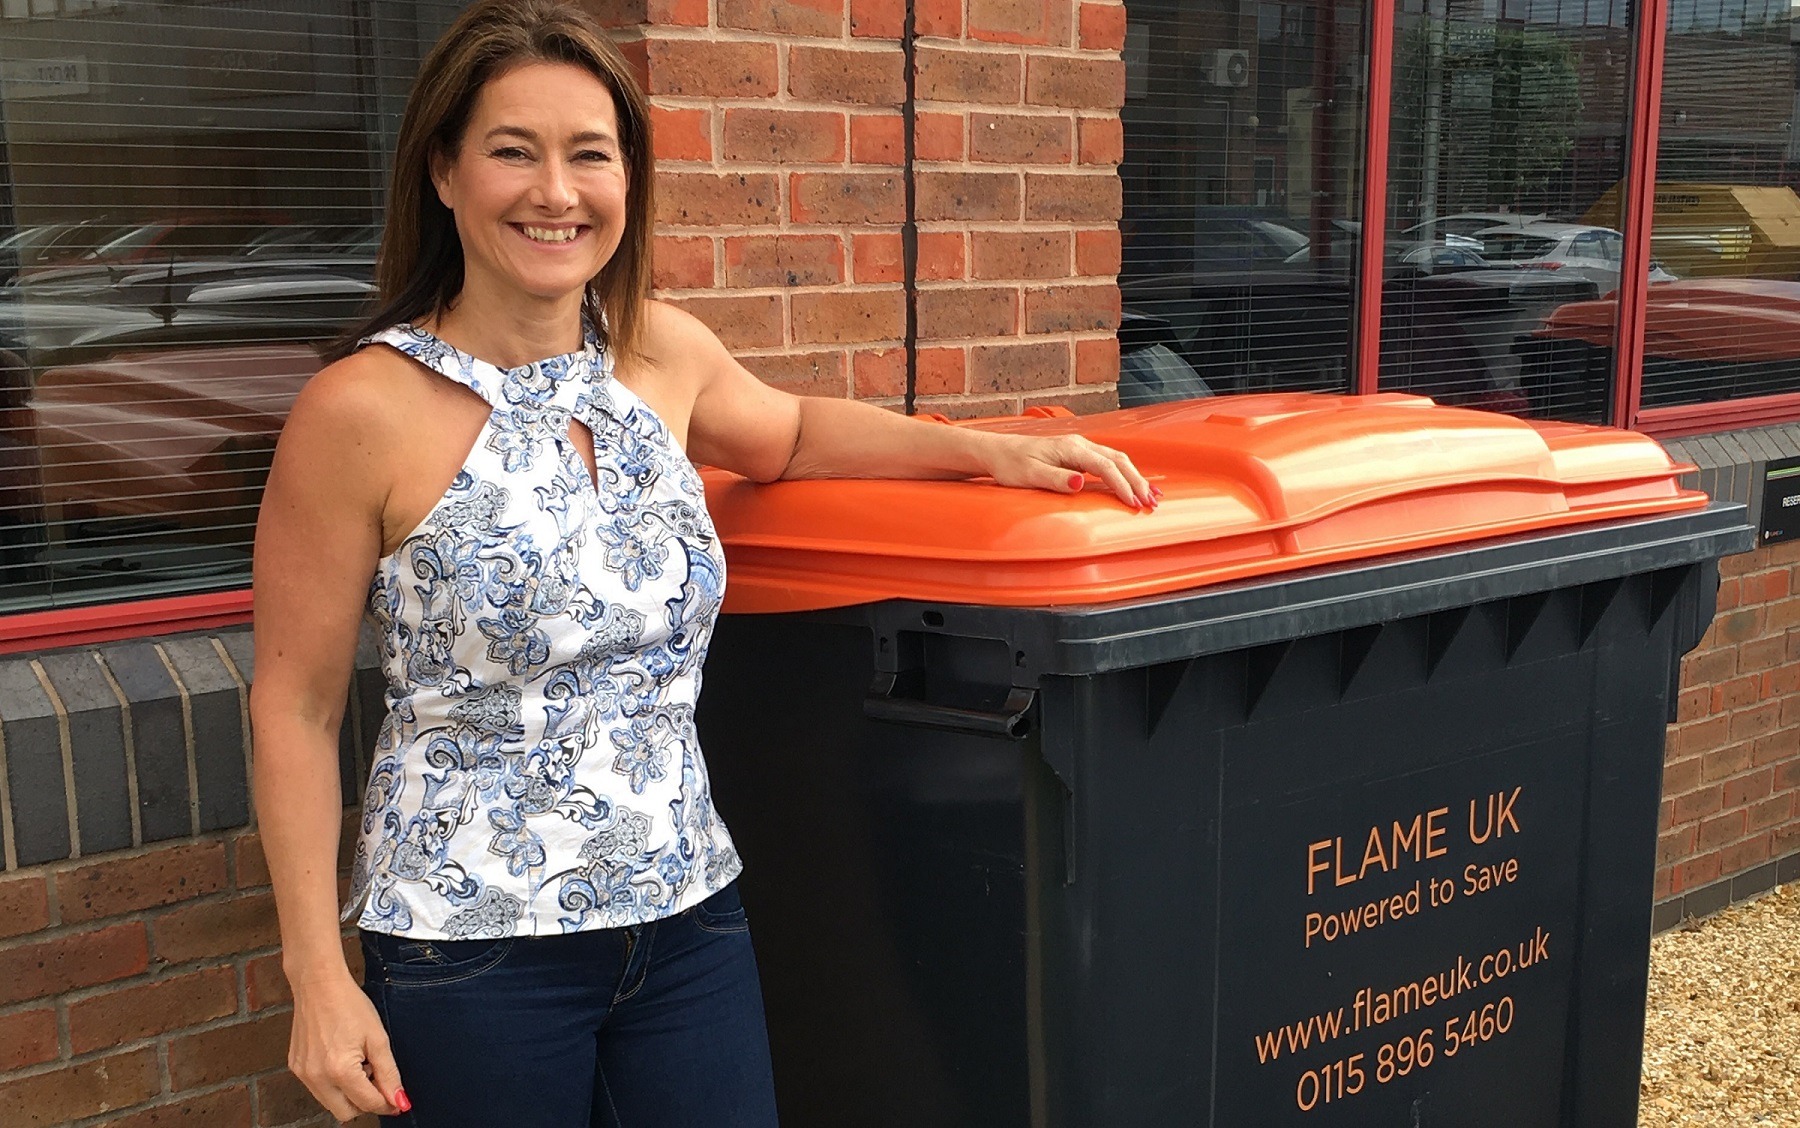 A meeting with a waste professional…Pam Knight of Flame UK